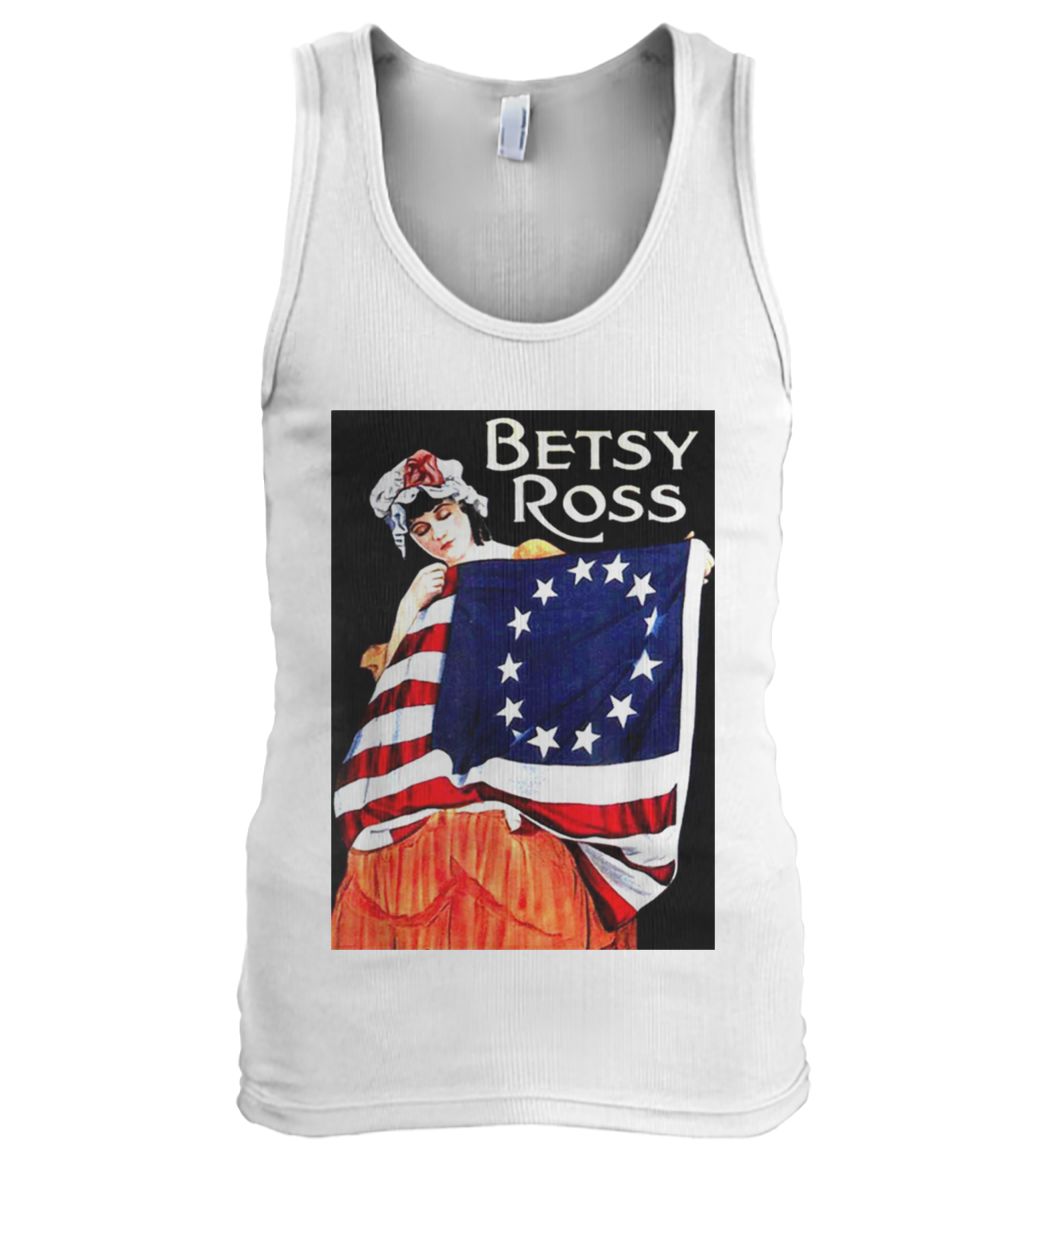 Betsy ross american flag 1776 4th of july men's tank top